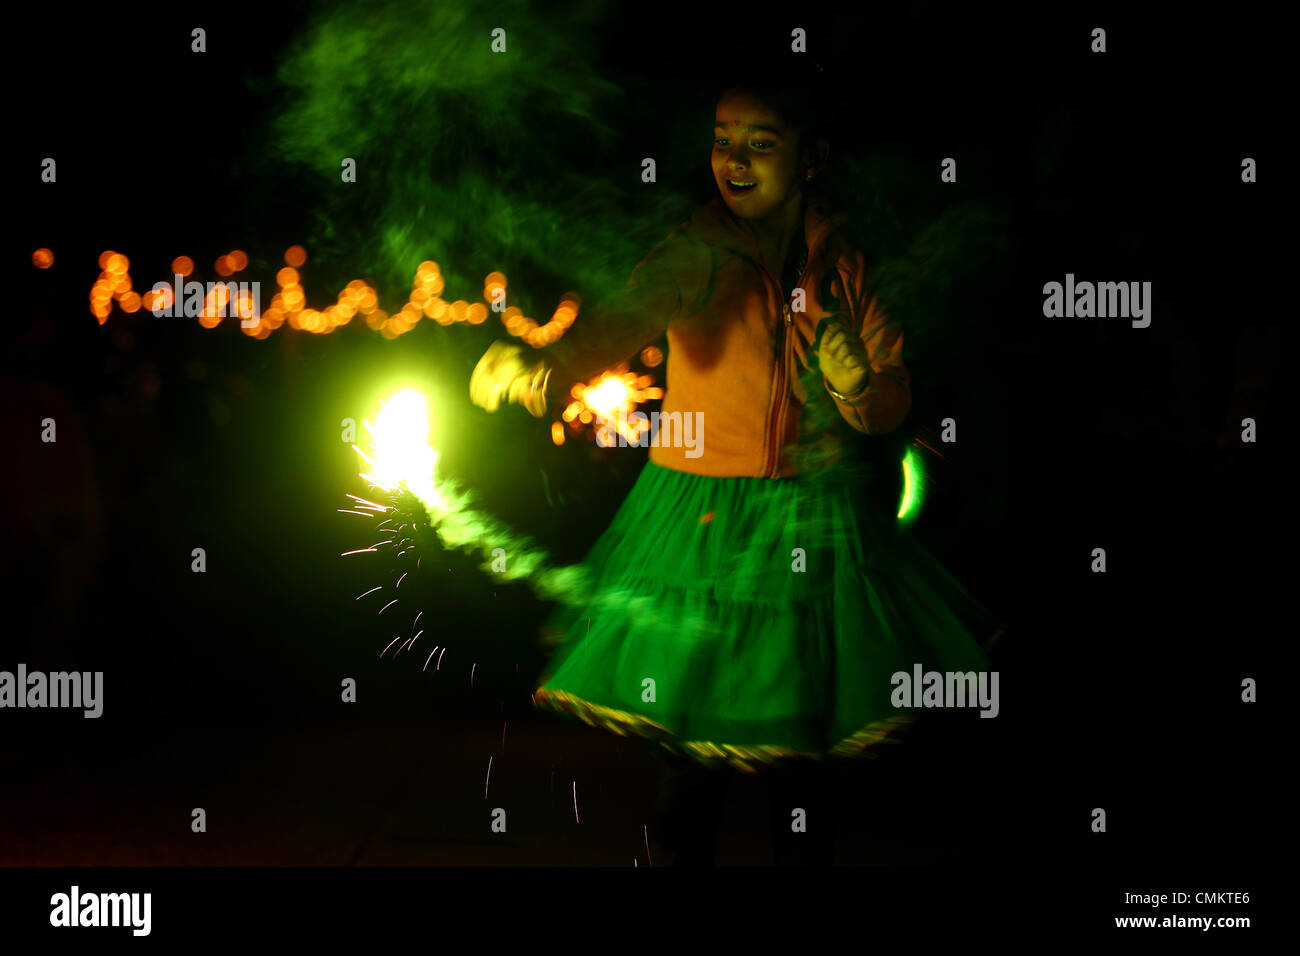 A young girl celebrating Diwali - the popular festival of Diwali in India Stock Photo